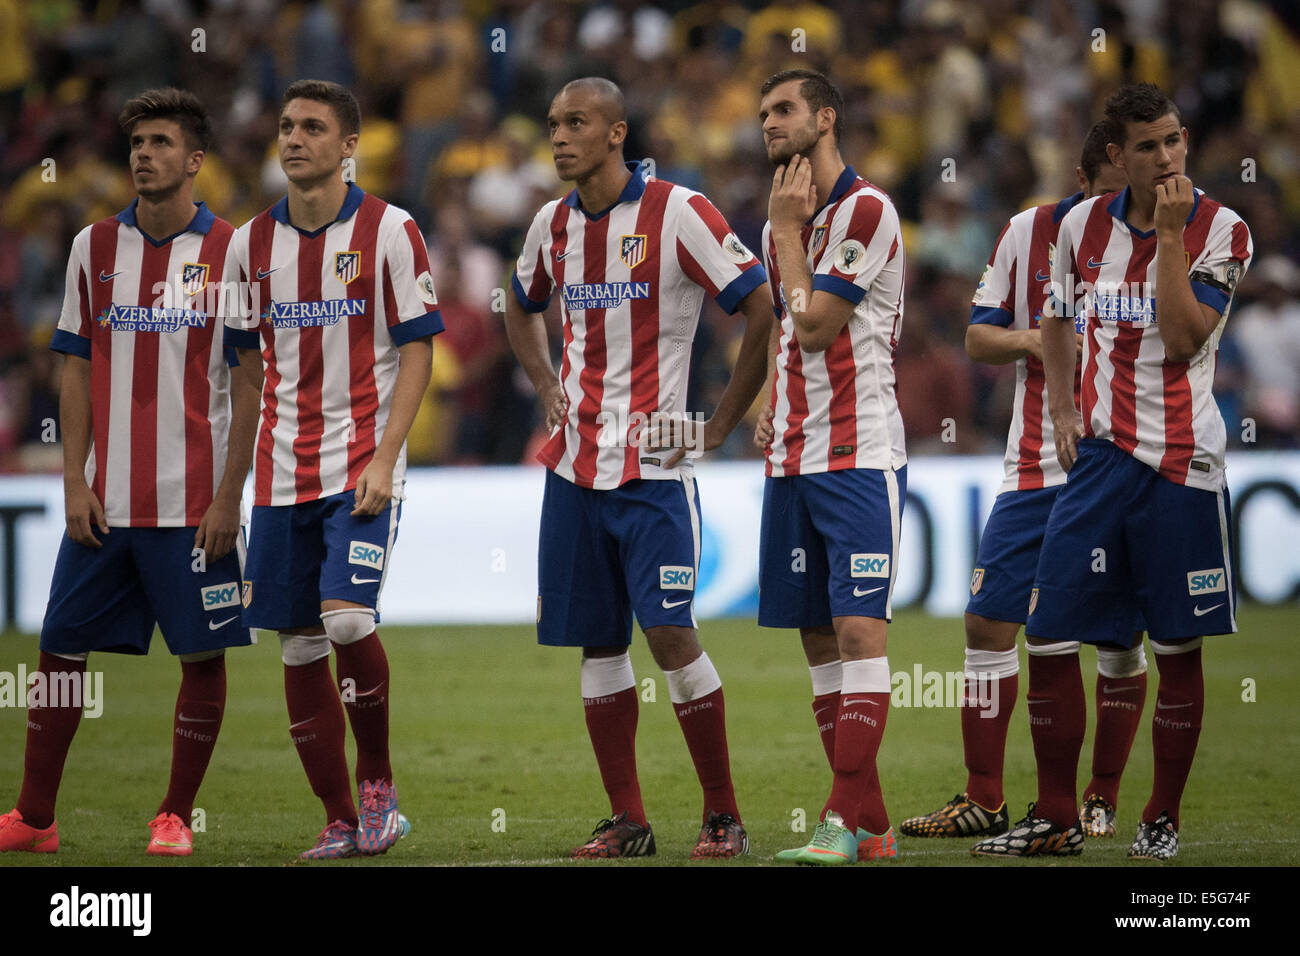 Mexico City, Mexico. 30th July, 2014. Players of Atletico de Madrid react after the match of the EuroAmerican Cup against America held at Azteca Stadium in Mexico City, capital of Mexico, on July 30, 2014. © Pedro Mera/Xinhua/Alamy Live News Stock Photo